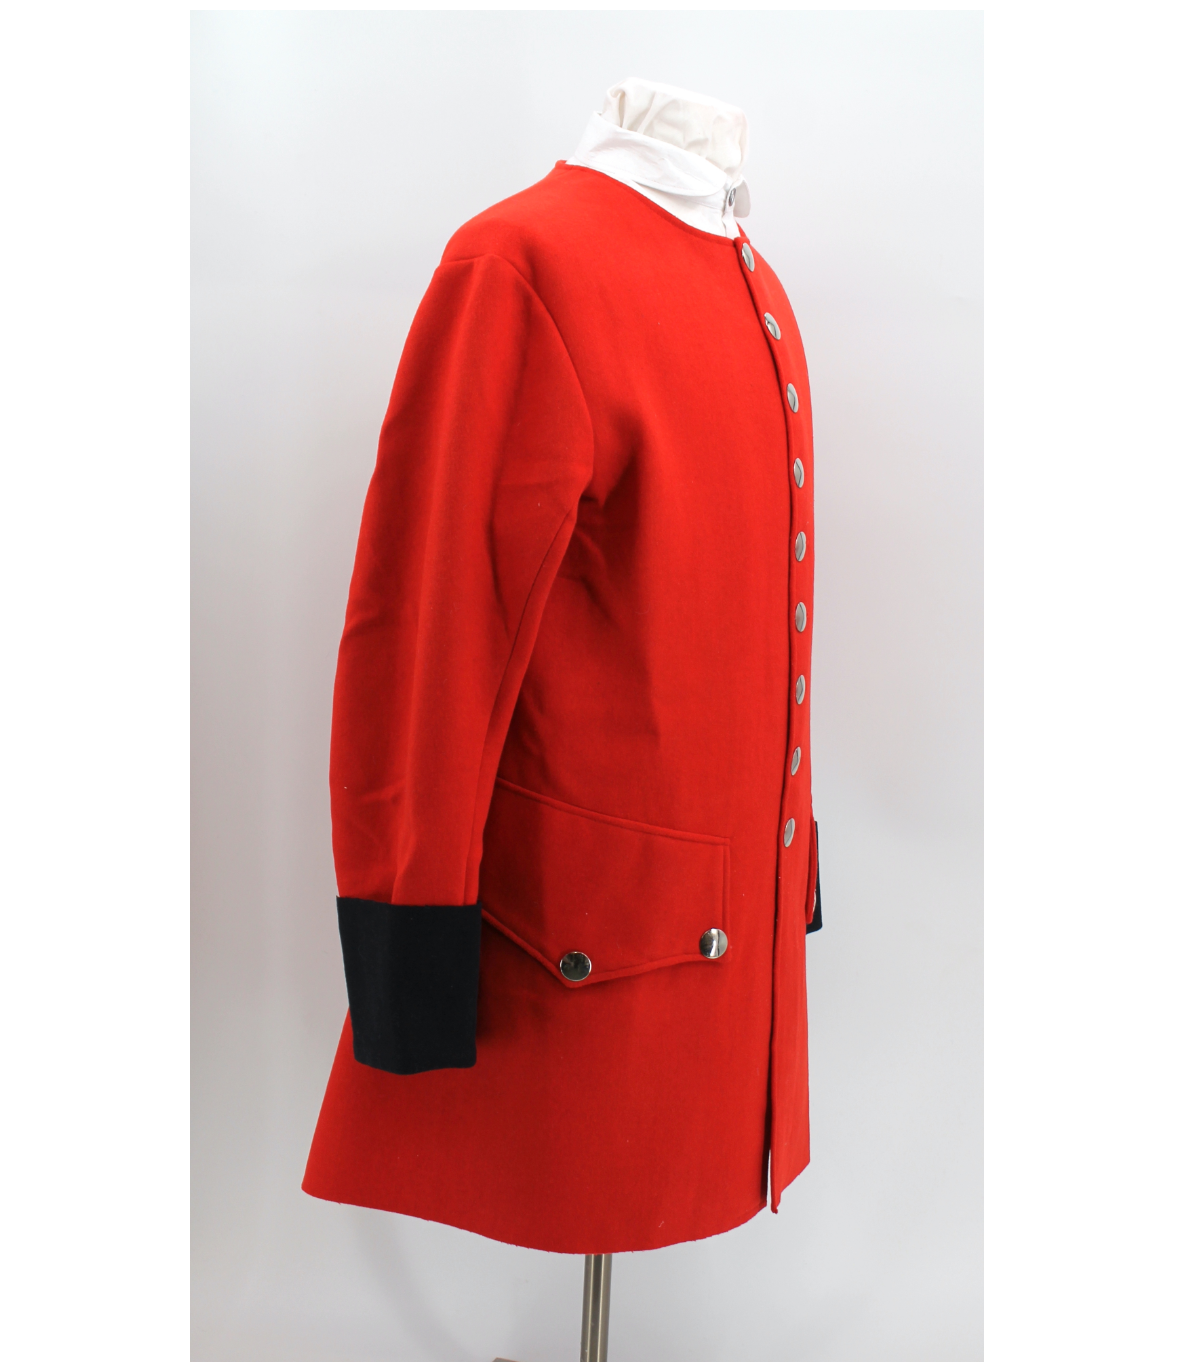 Colonial Elegance Revived: Red Wool Sleeved Waistcoat with Blue Cuffs for Historical Enthusiasts